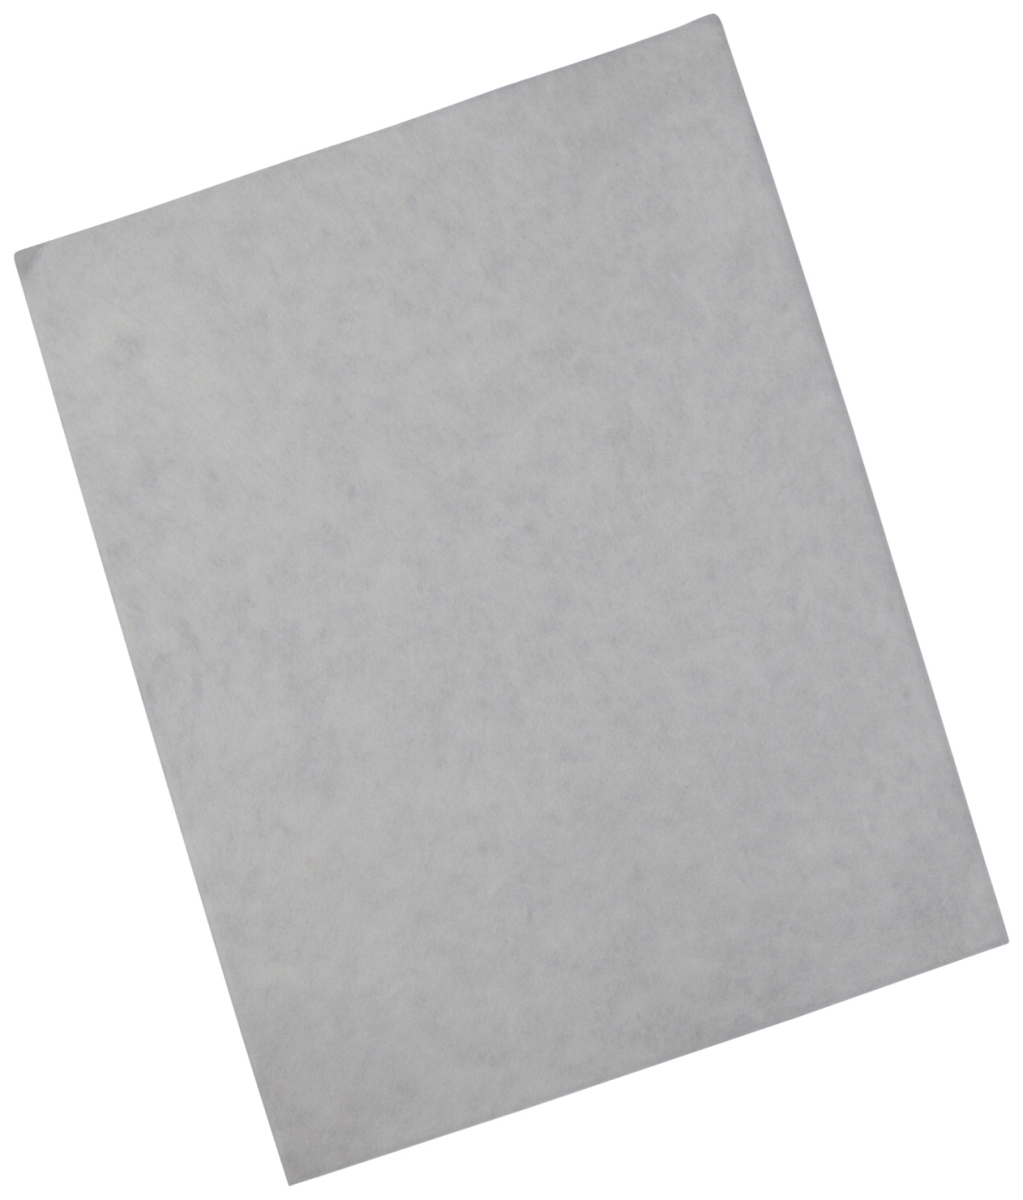 2021465 8.5 X 11 In. 100 Gsm Mulberry Paper With 25 Sheets